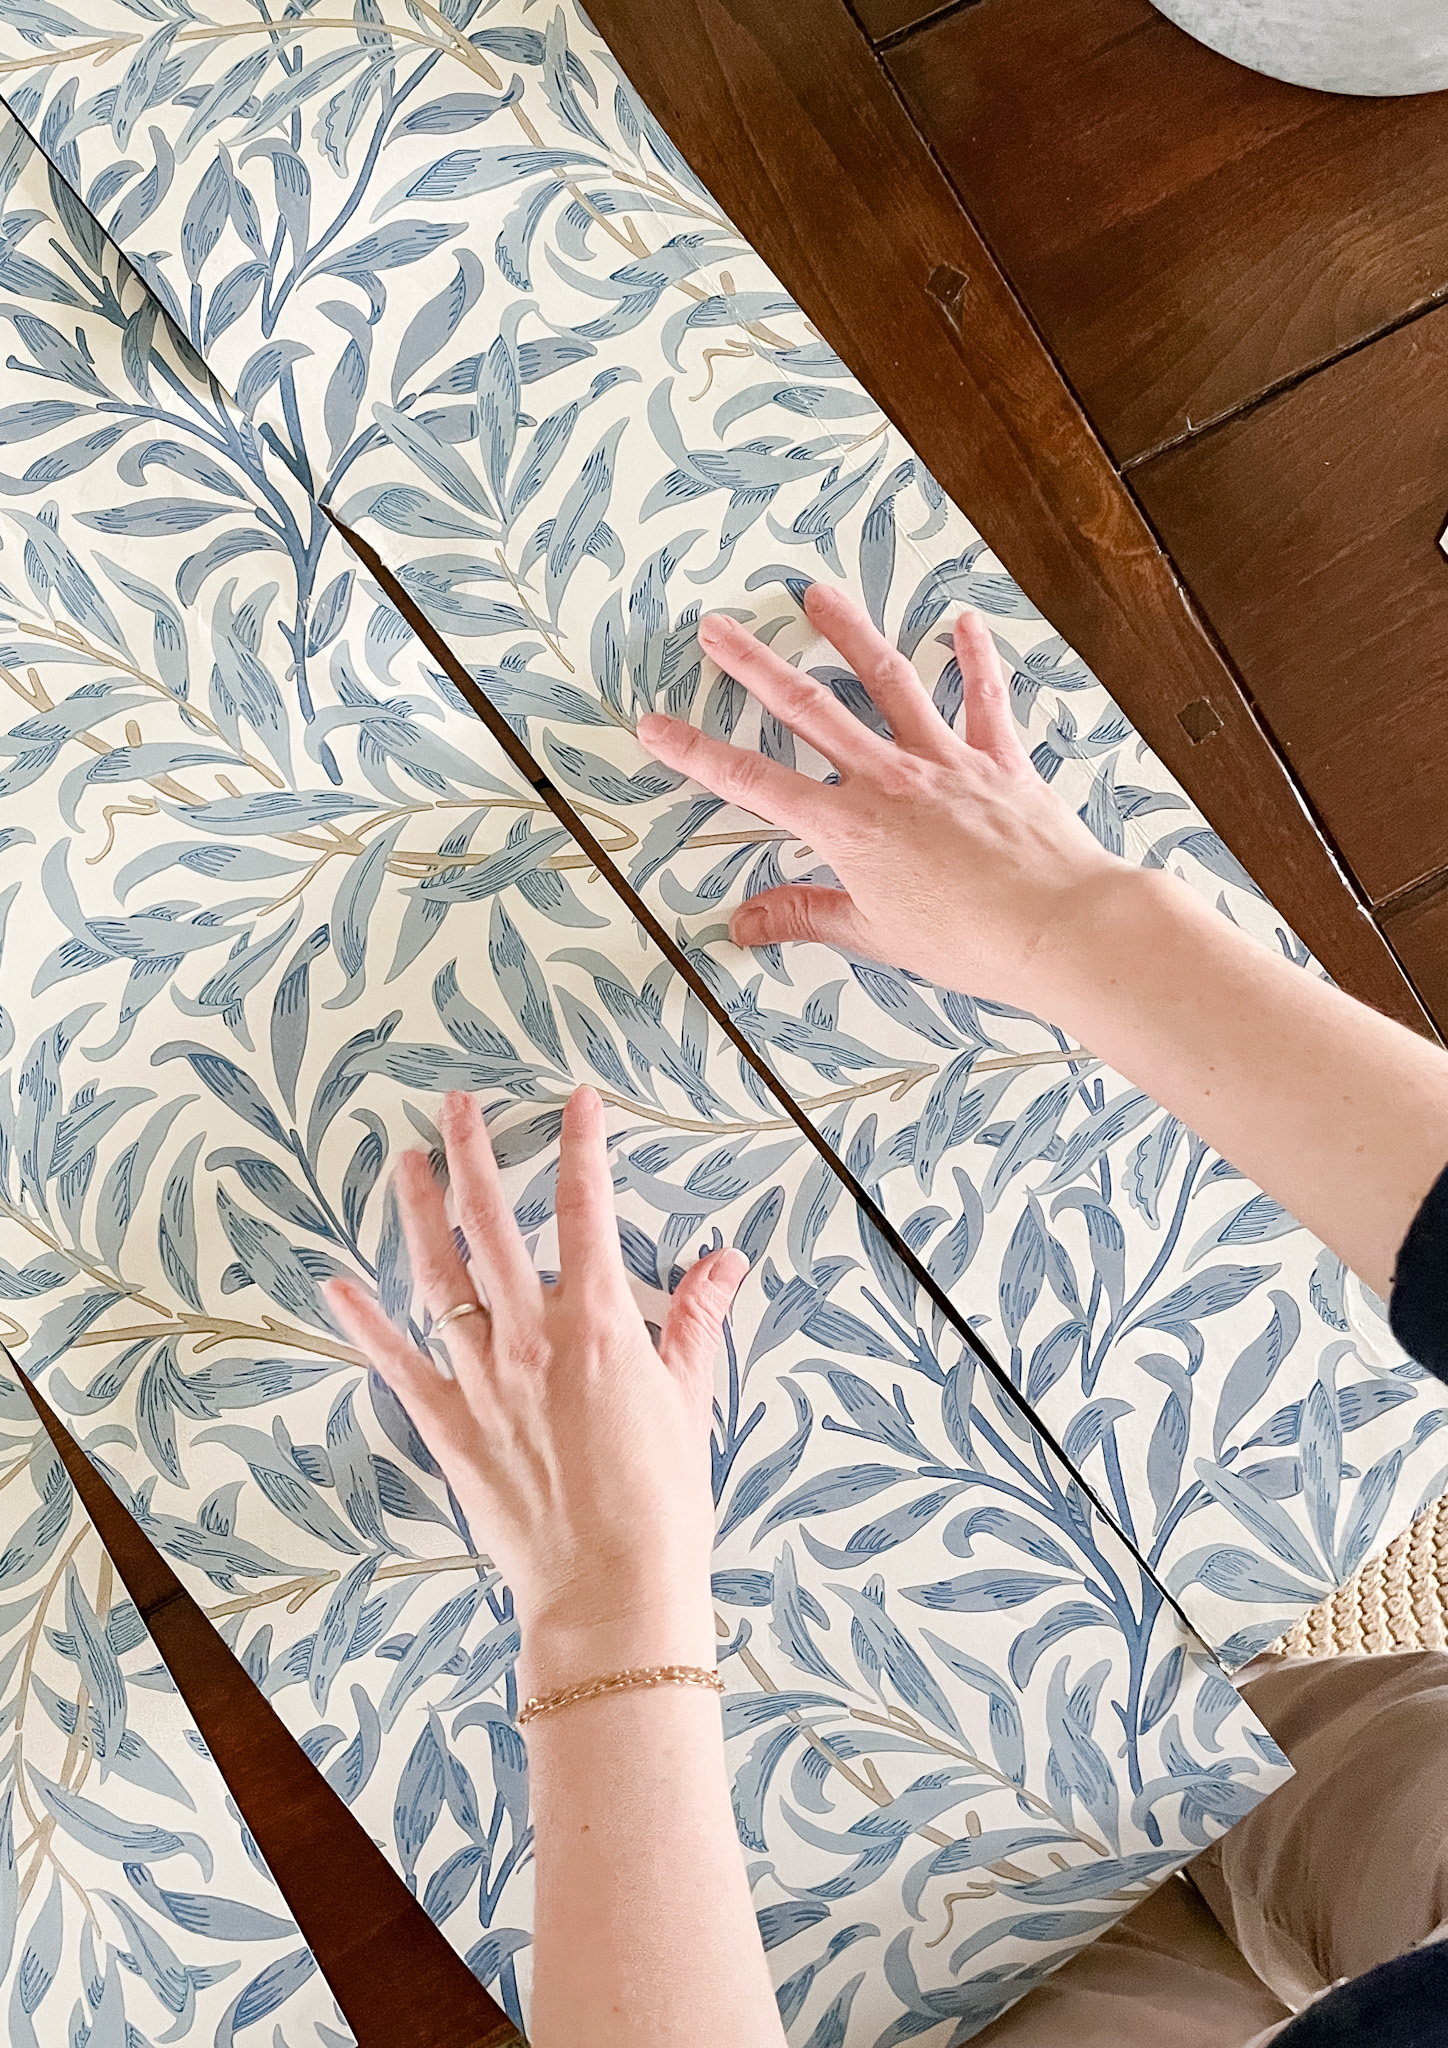 lining the pattern of the wallpaper